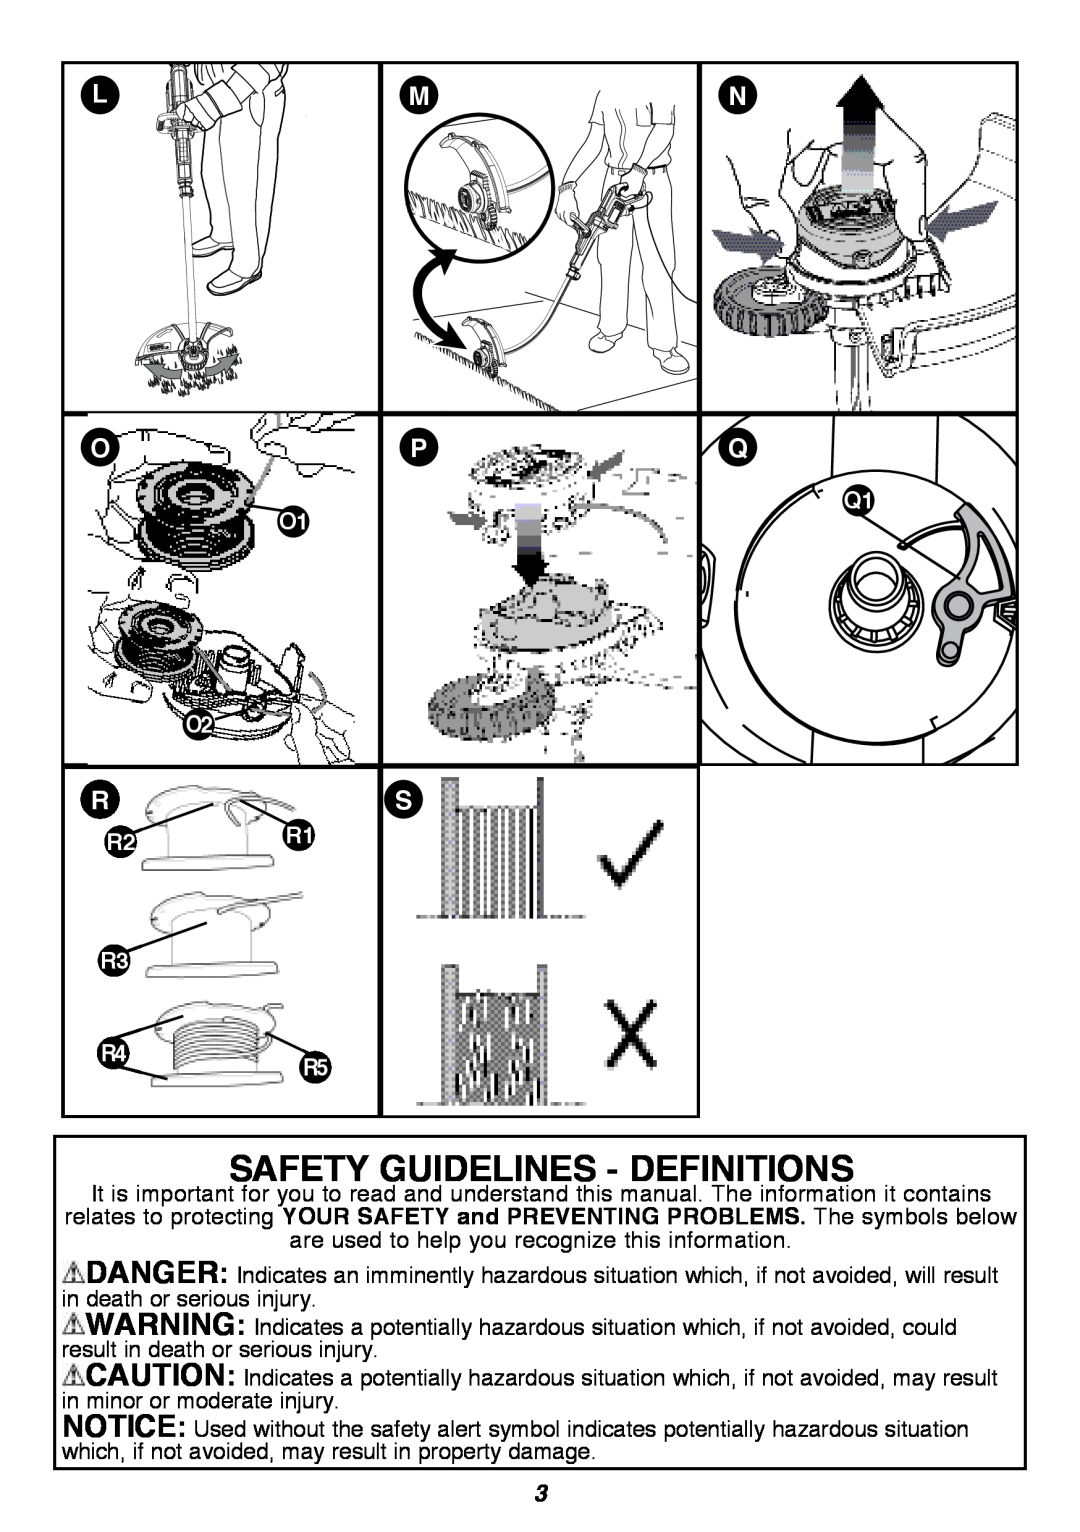 Black & Decker SF-080 instruction manual Safety Guidelines - Definitions 